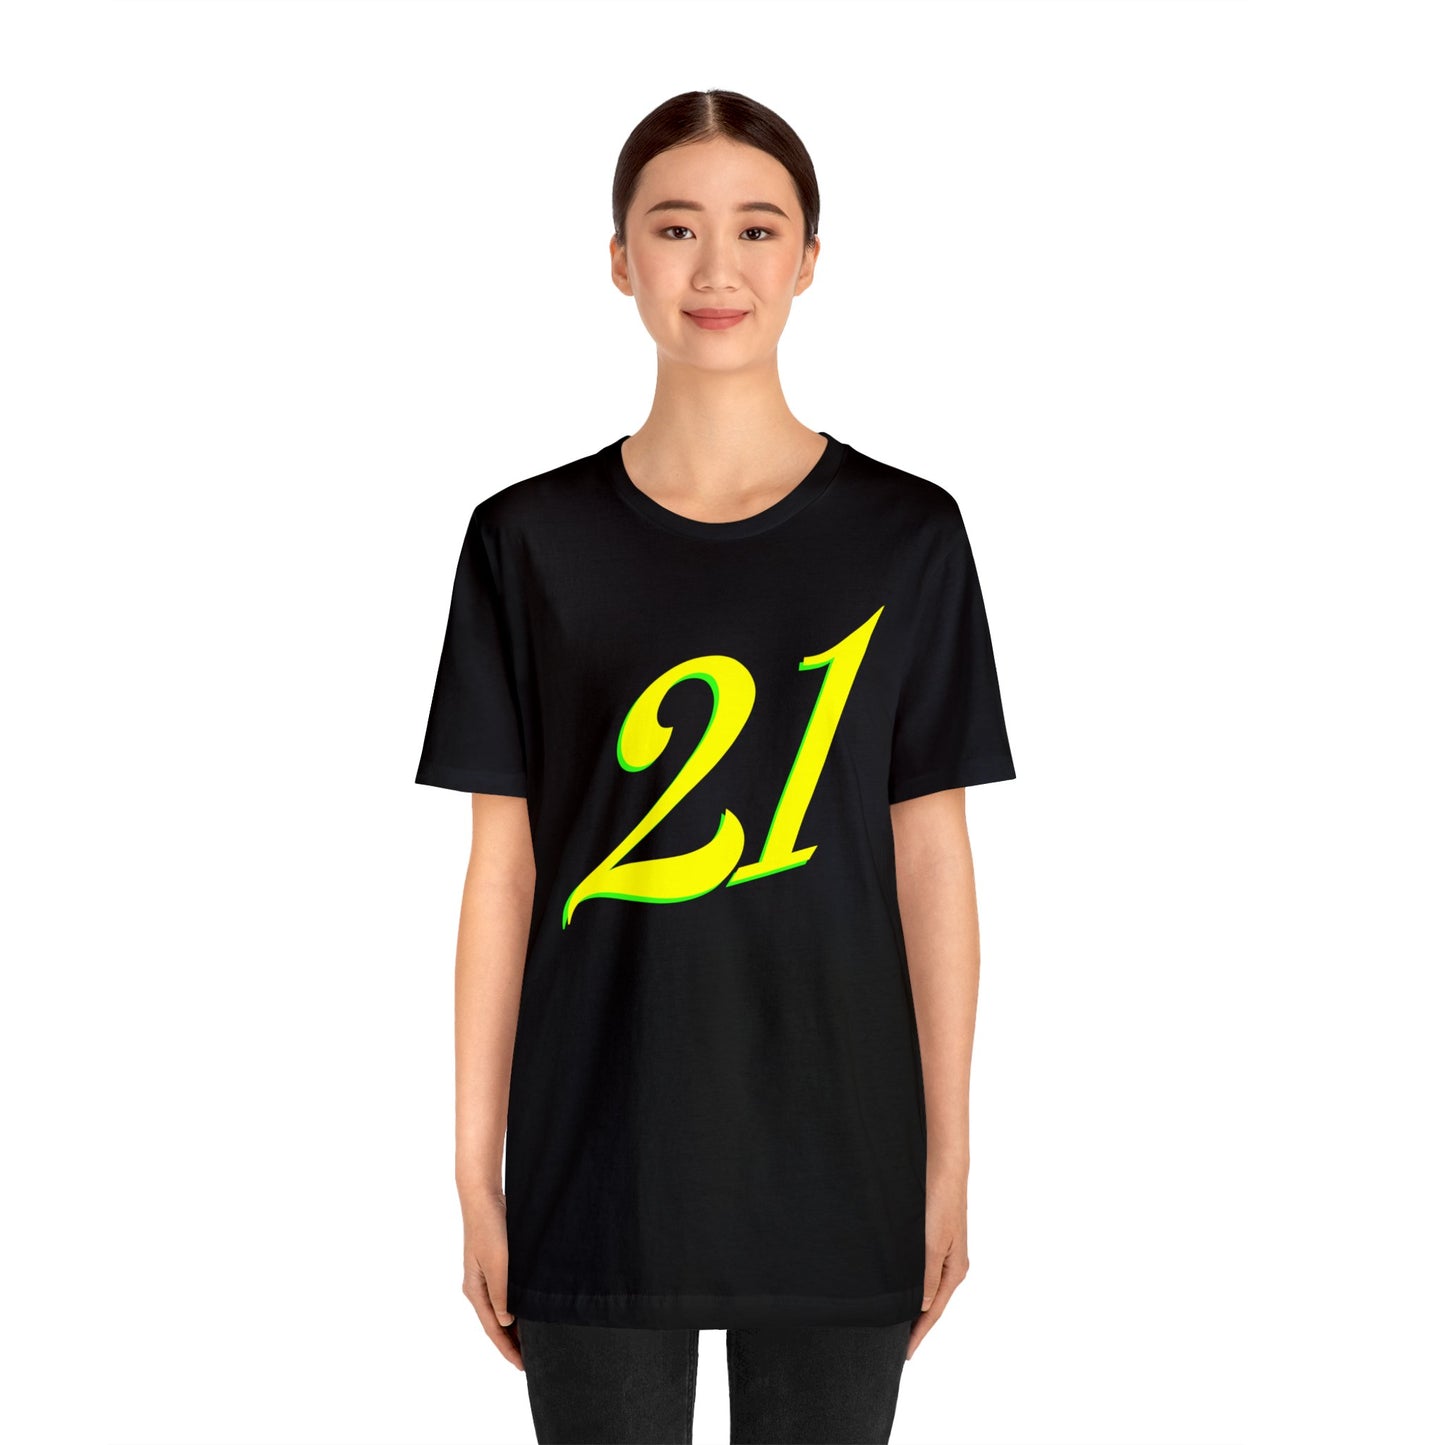 Number 21 Design - Soft Cotton Tee for birthdays and celebrations, Gift for friends and family, Multiple Options by clothezy.com in Black Size Medium - Buy Now